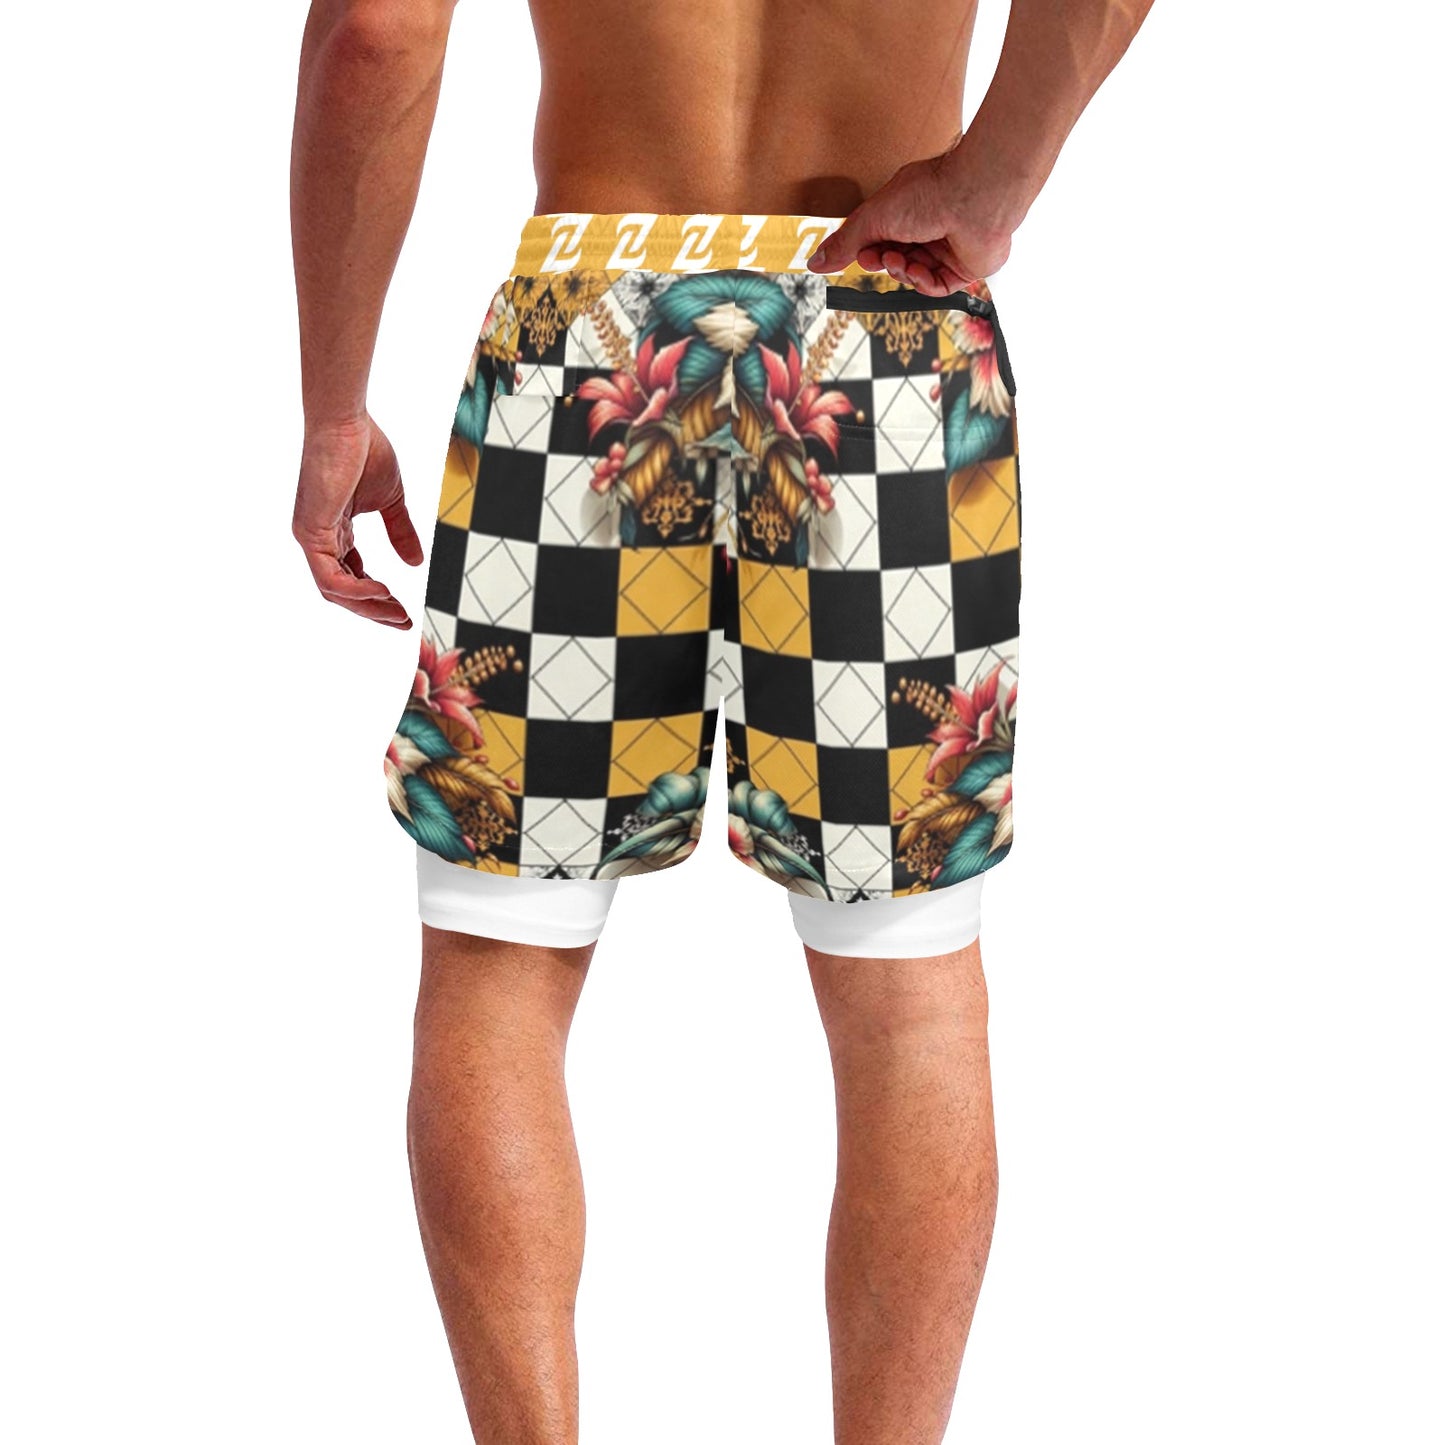 Zen Shorts with Liner - Flower Checkers